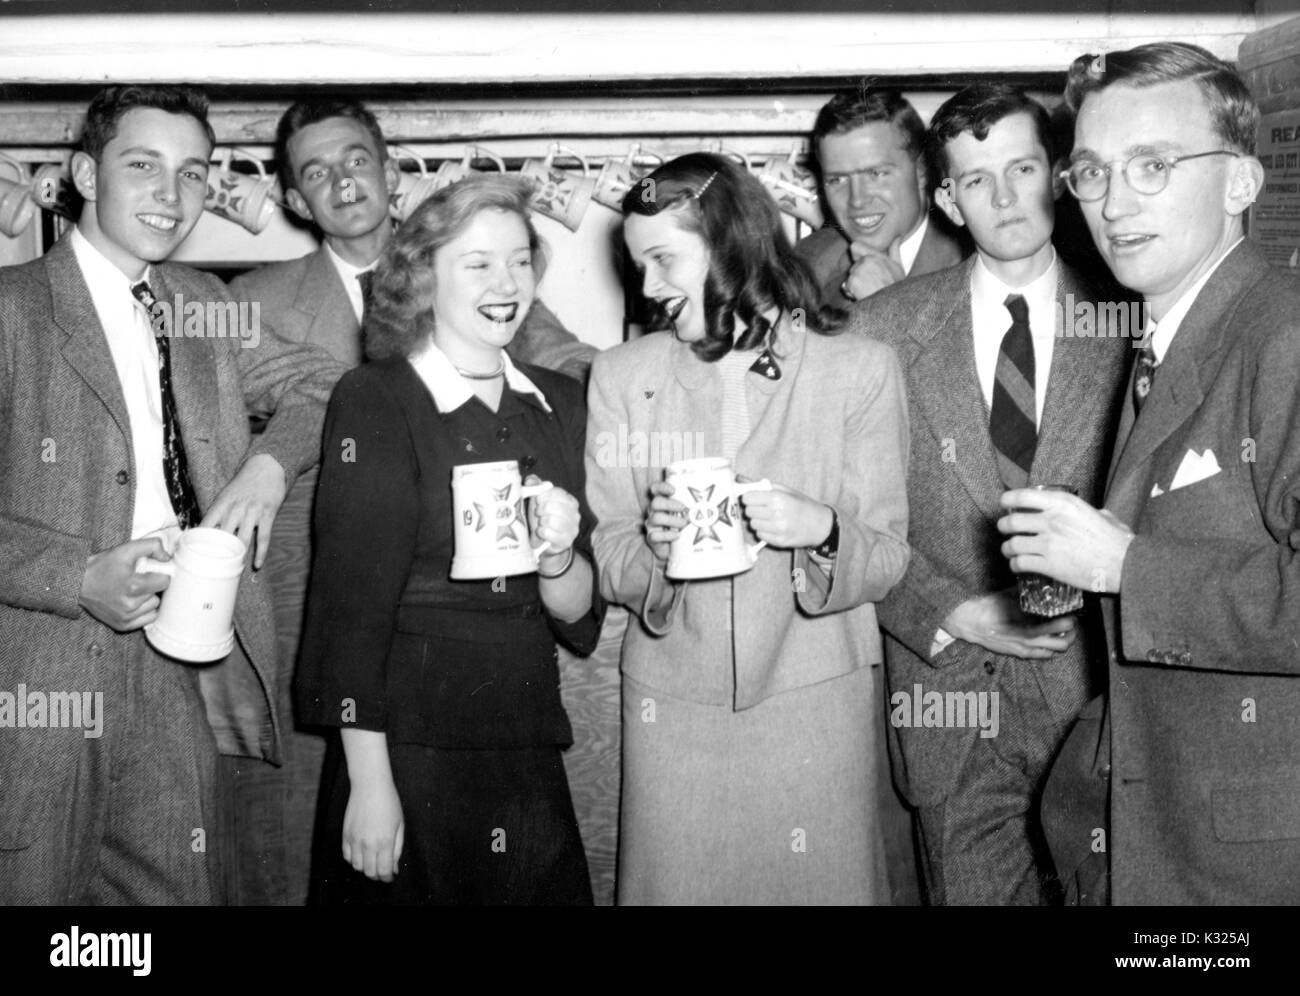 At a party hosted by the Delta Phi fraternity at Johns Hopkins University, brothers stand in a group wearing suits next to their girlfriends, everyone smiling and drinking beer from tall mugs, in a fraternity house basement right off campus, Baltimore, Maryland, March, 1947. Stock Photo